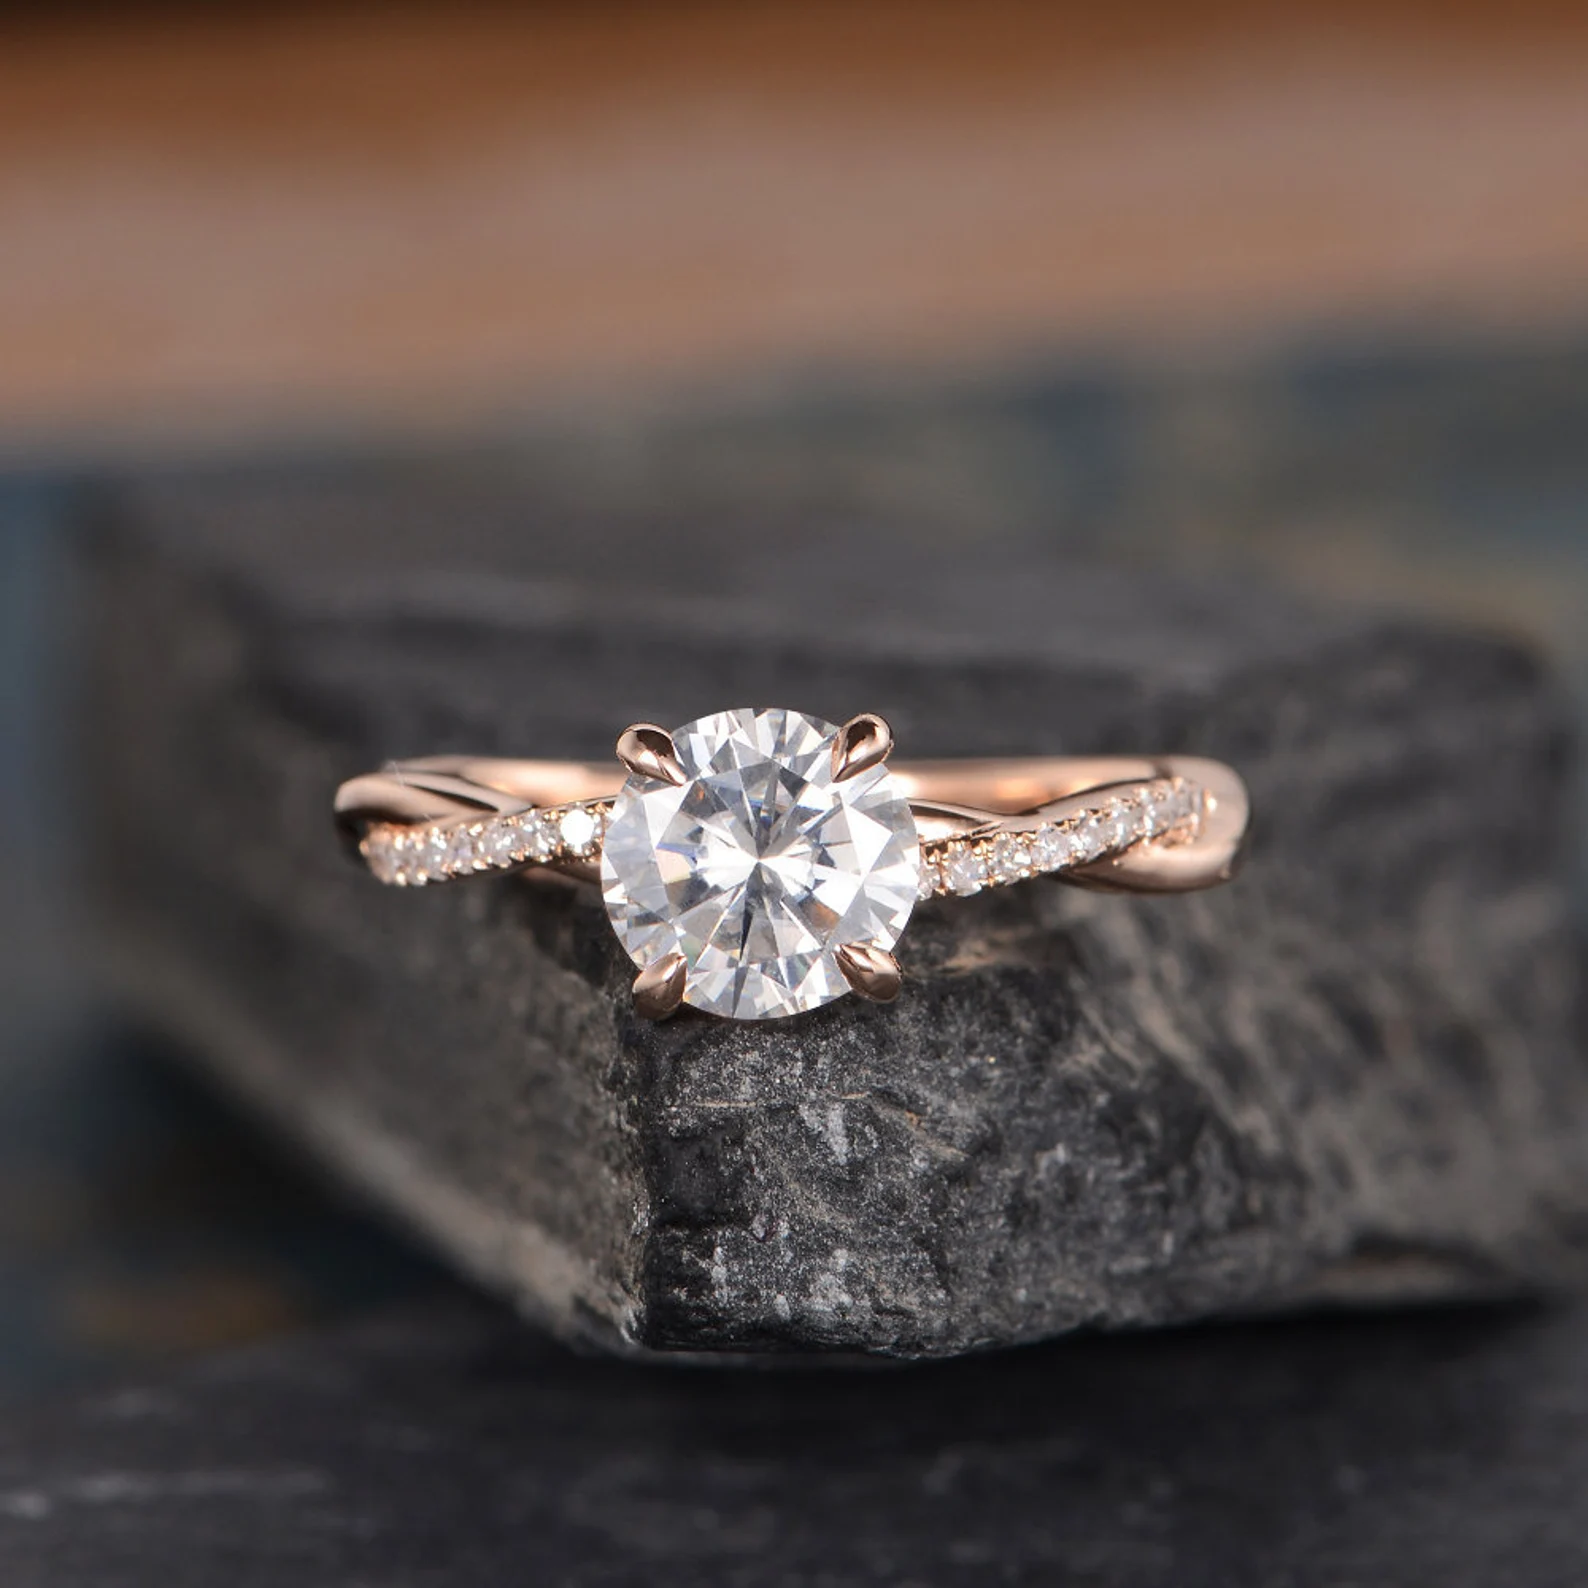 Ethically Sourced Lab Grown Diamonds on Etsy